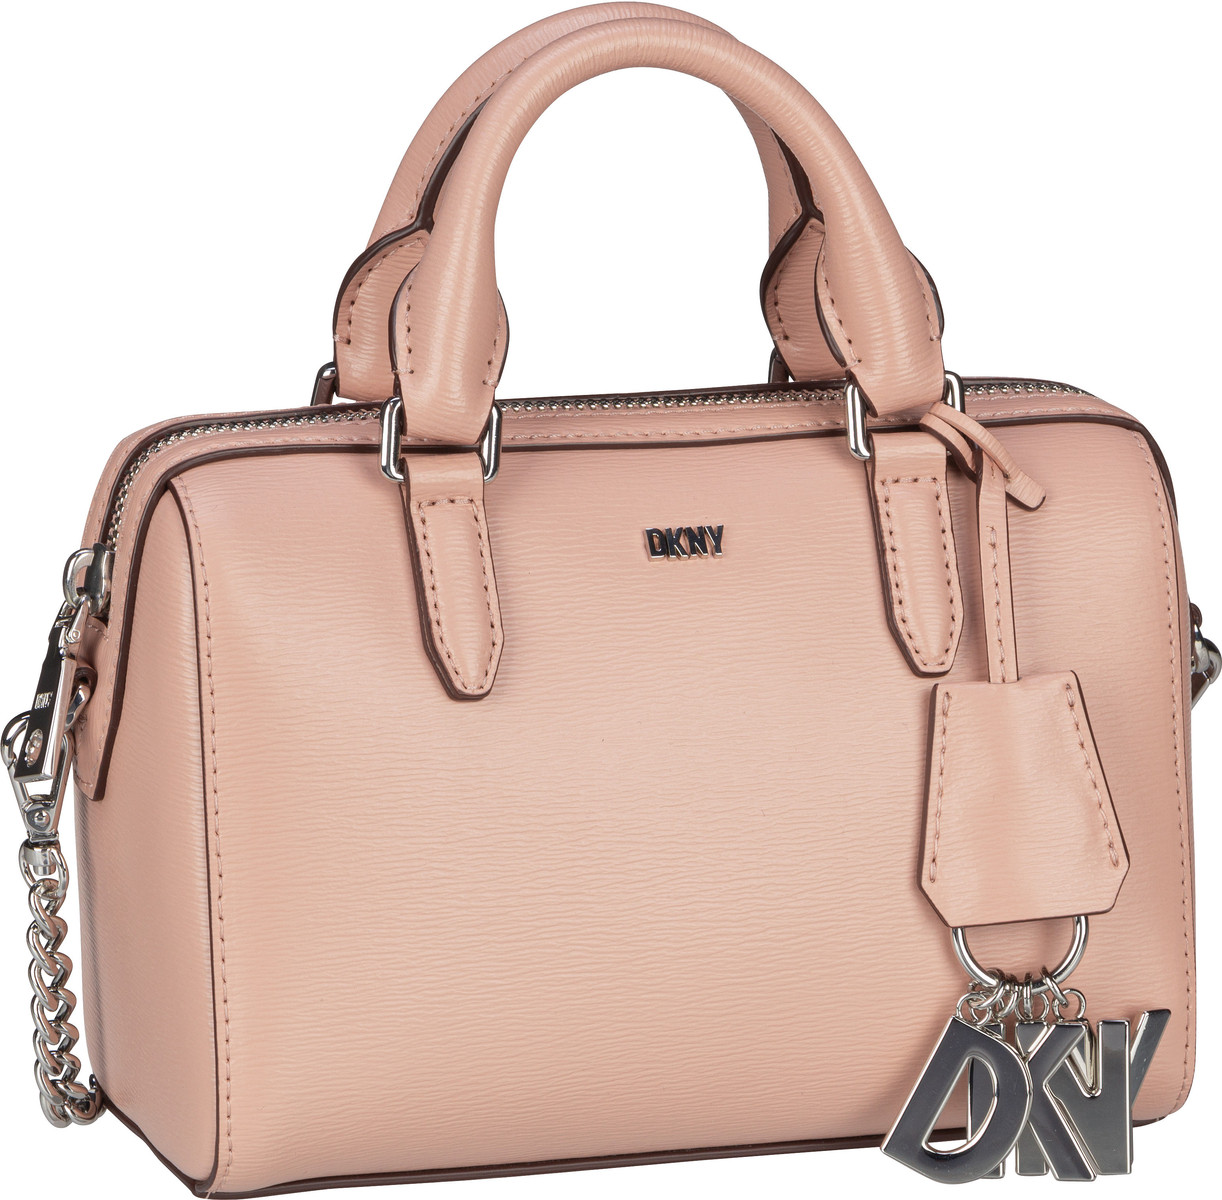 DKNY Paige Sutton Leather SM Duffle - Rosewater